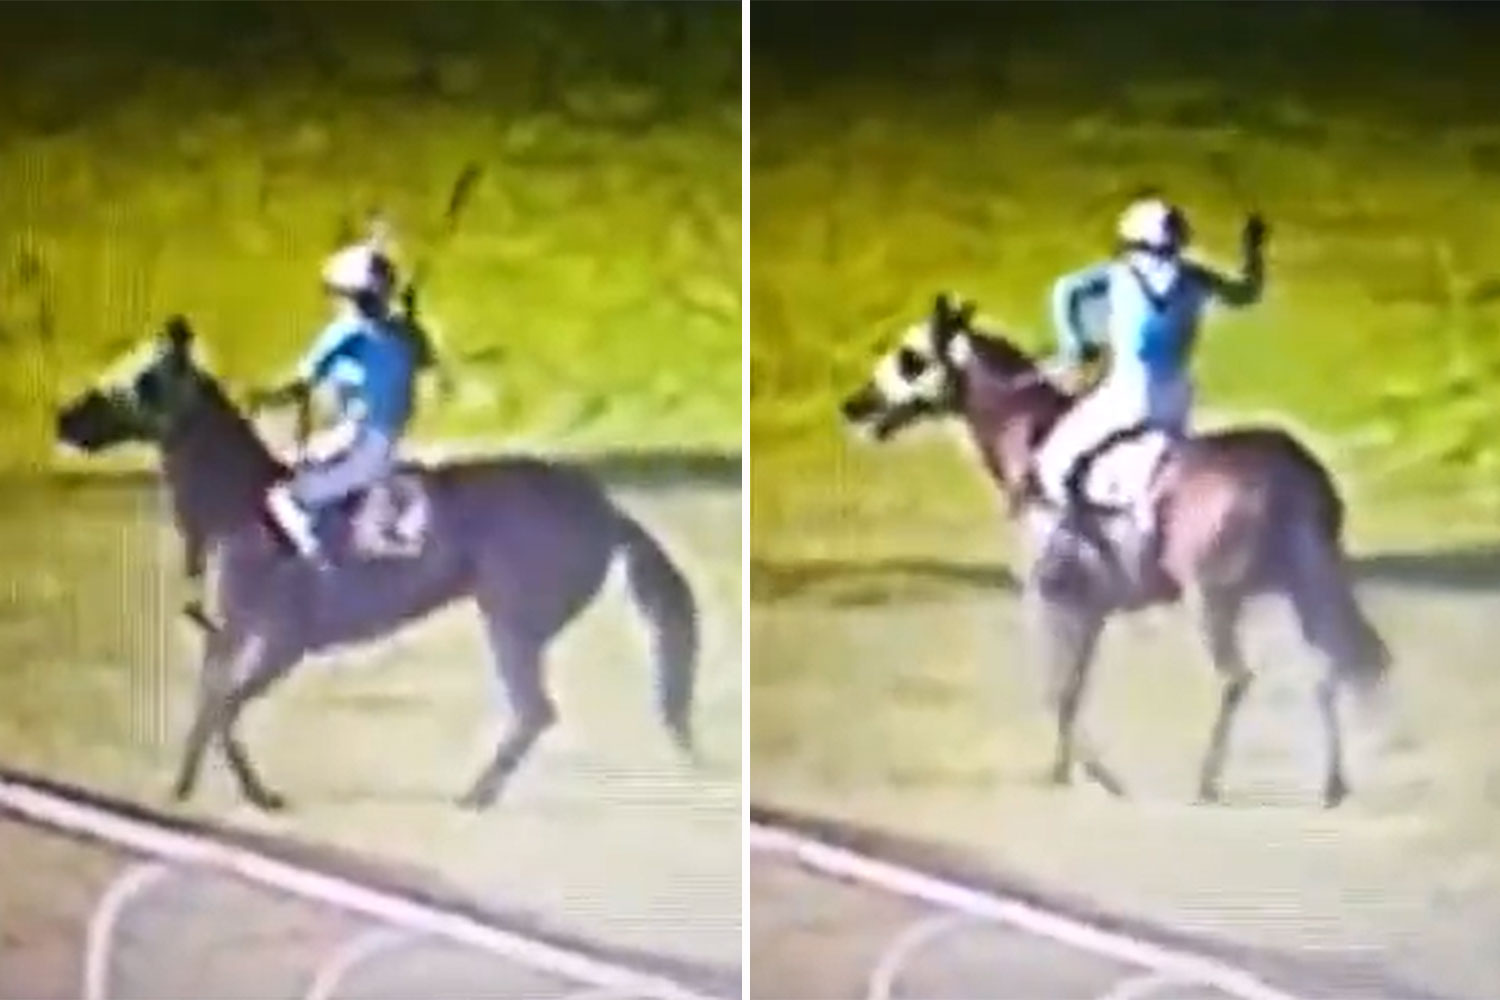 'Ban him for life!' - Fury as jockey filmed hitting horse in the face twice